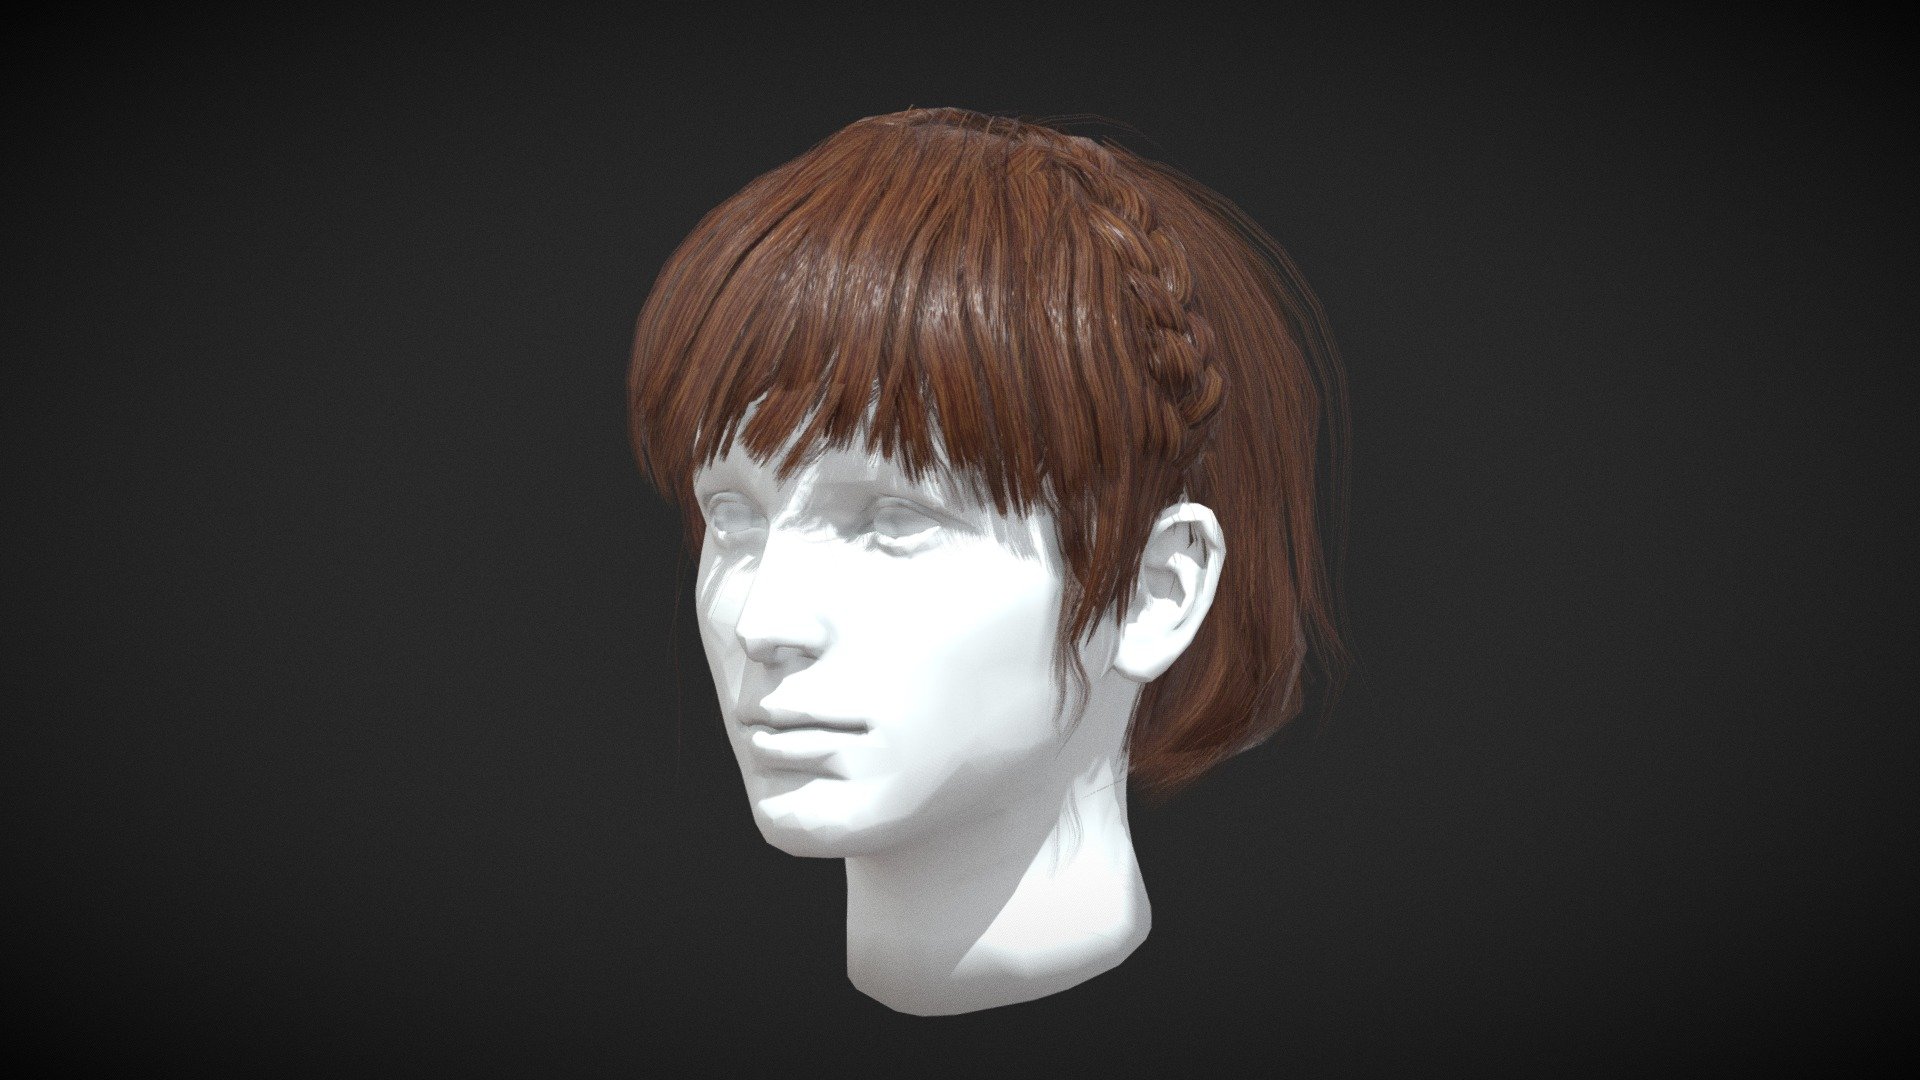 Hair Female / hairstyle with braids and bangs - low poly hair cards

Triangles: 13k
Vertices: 8.2k

4096x4096 PNG texture - Hair Female / Hairstyle - low poly - Buy Royalty Free 3D model by Karolina Renkiewicz (@KarolinaRenkiewicz) 3d model